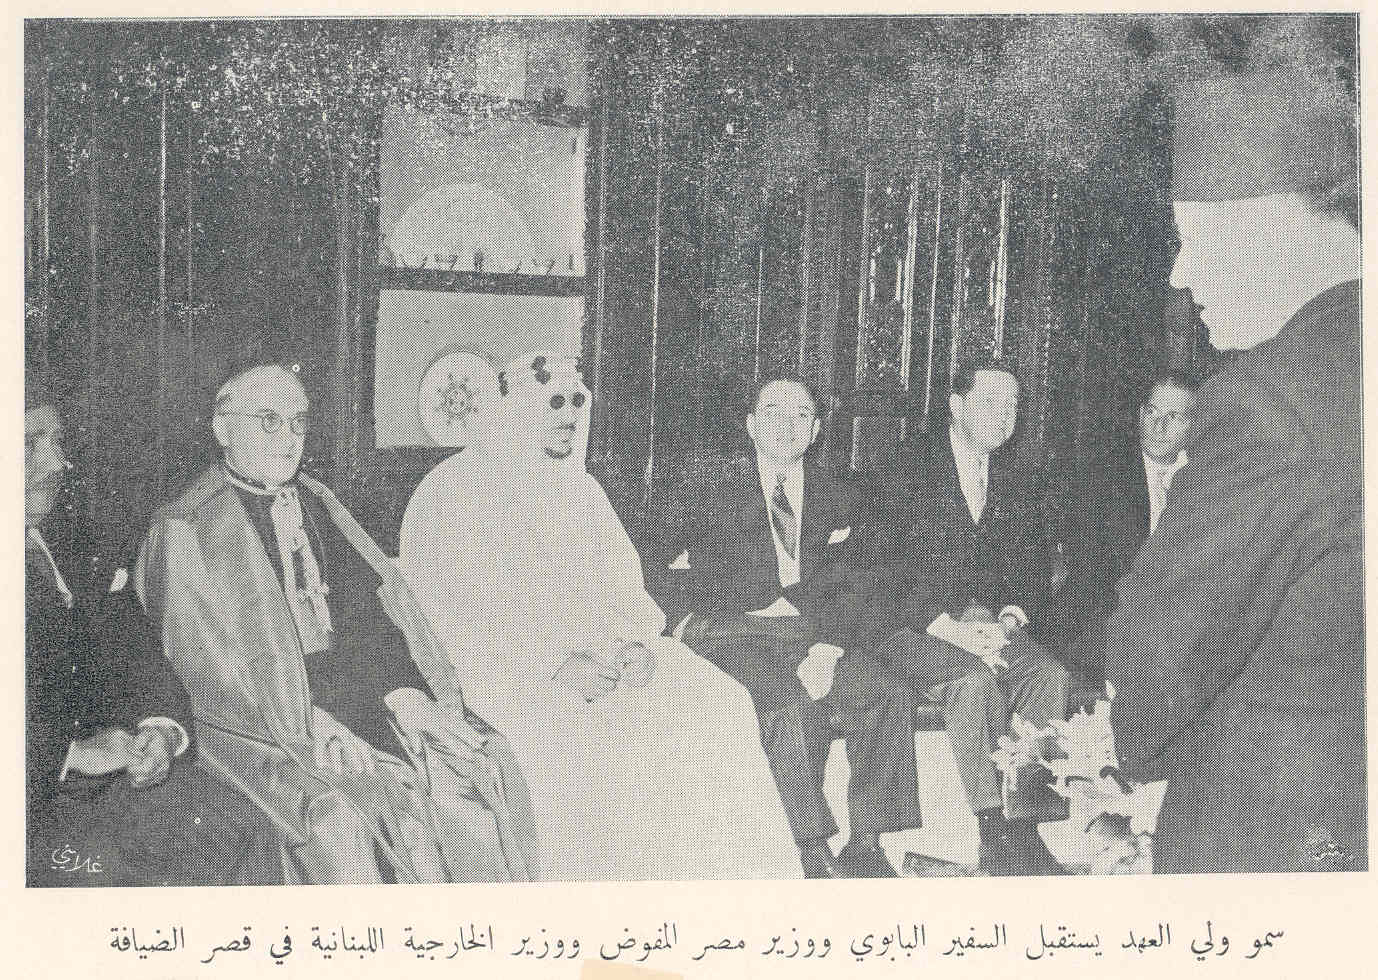 Crown Prince Saud receives nuncio Egypt Commissioner Minister and Foreign Minister Allbannanah Alziafa Palace in Beirut in 1953